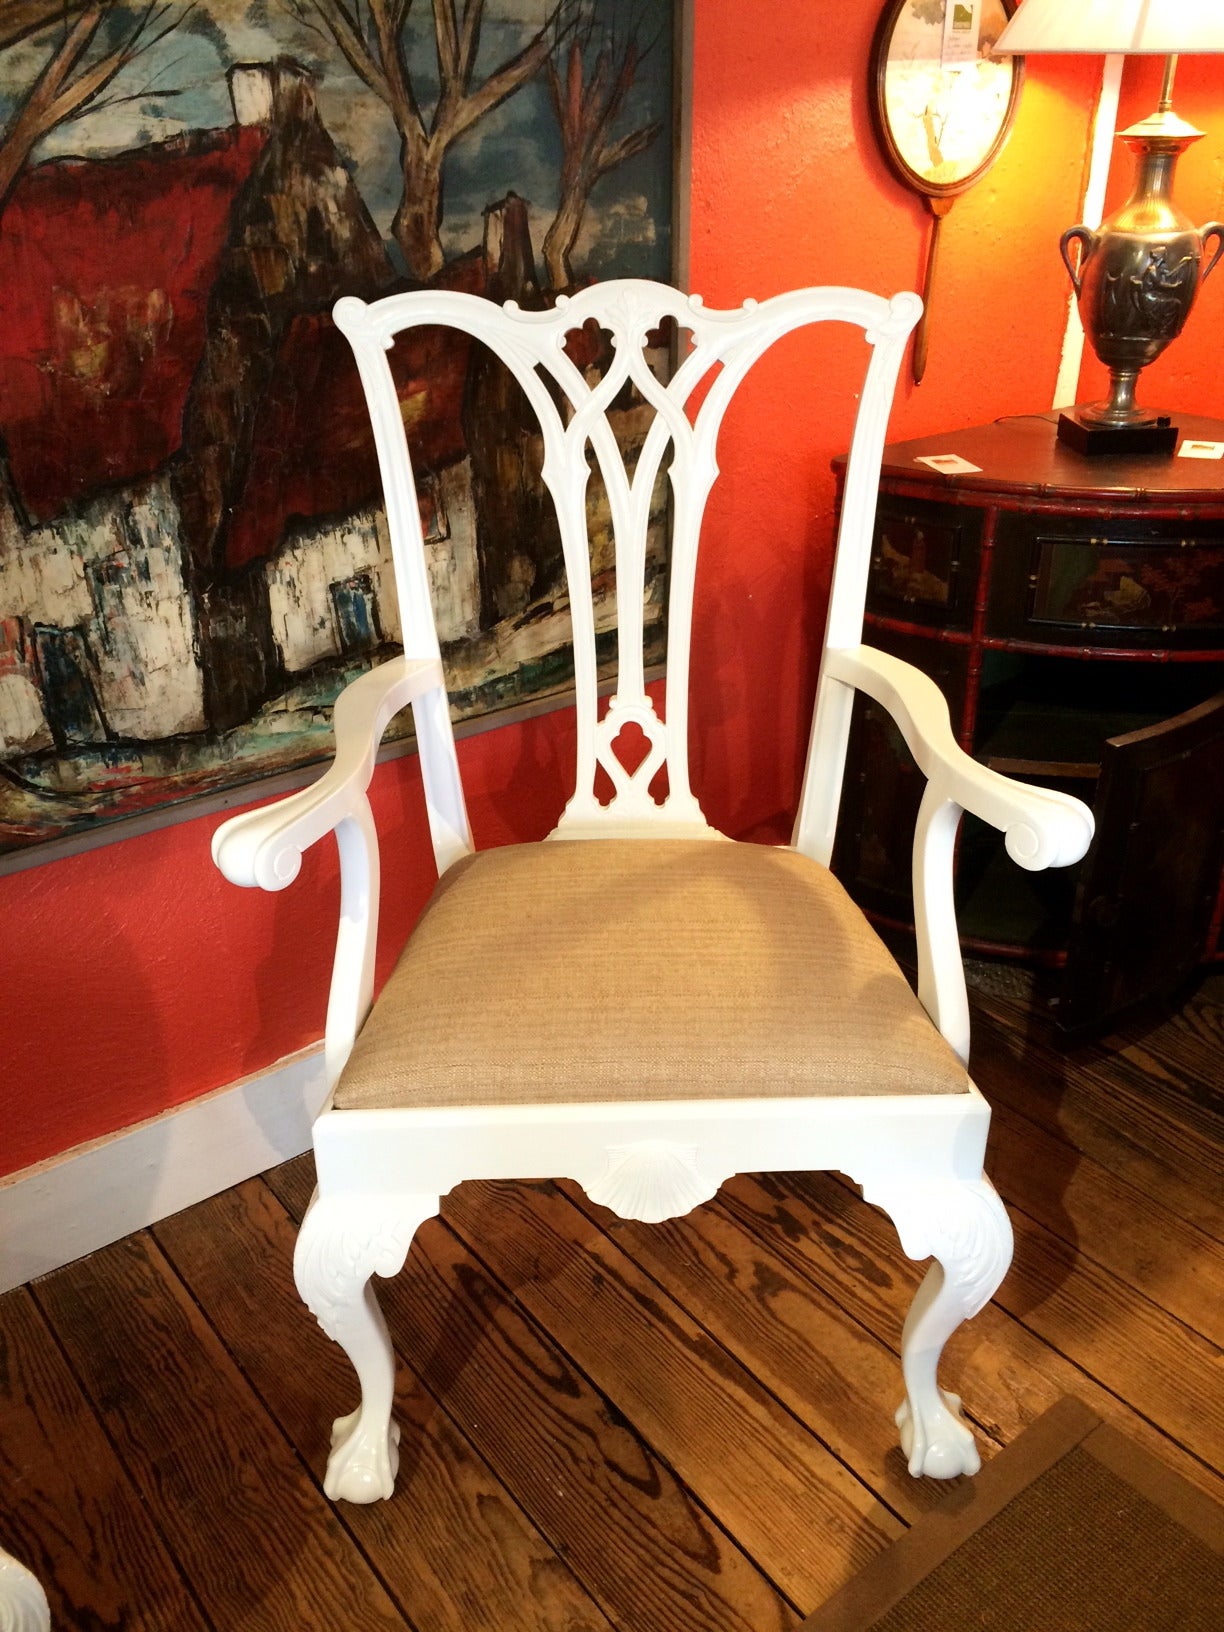 Elegant set of ten Centennial Chippendale style mahogany dining chairs, newly restored in white lacquer with neutral beige linen seat cushions. Two armchairs, eight side chairs. Ball and claw feet.
Dimensions: Armchairs: 
S/H 18 40.5 H 22 D. 
28